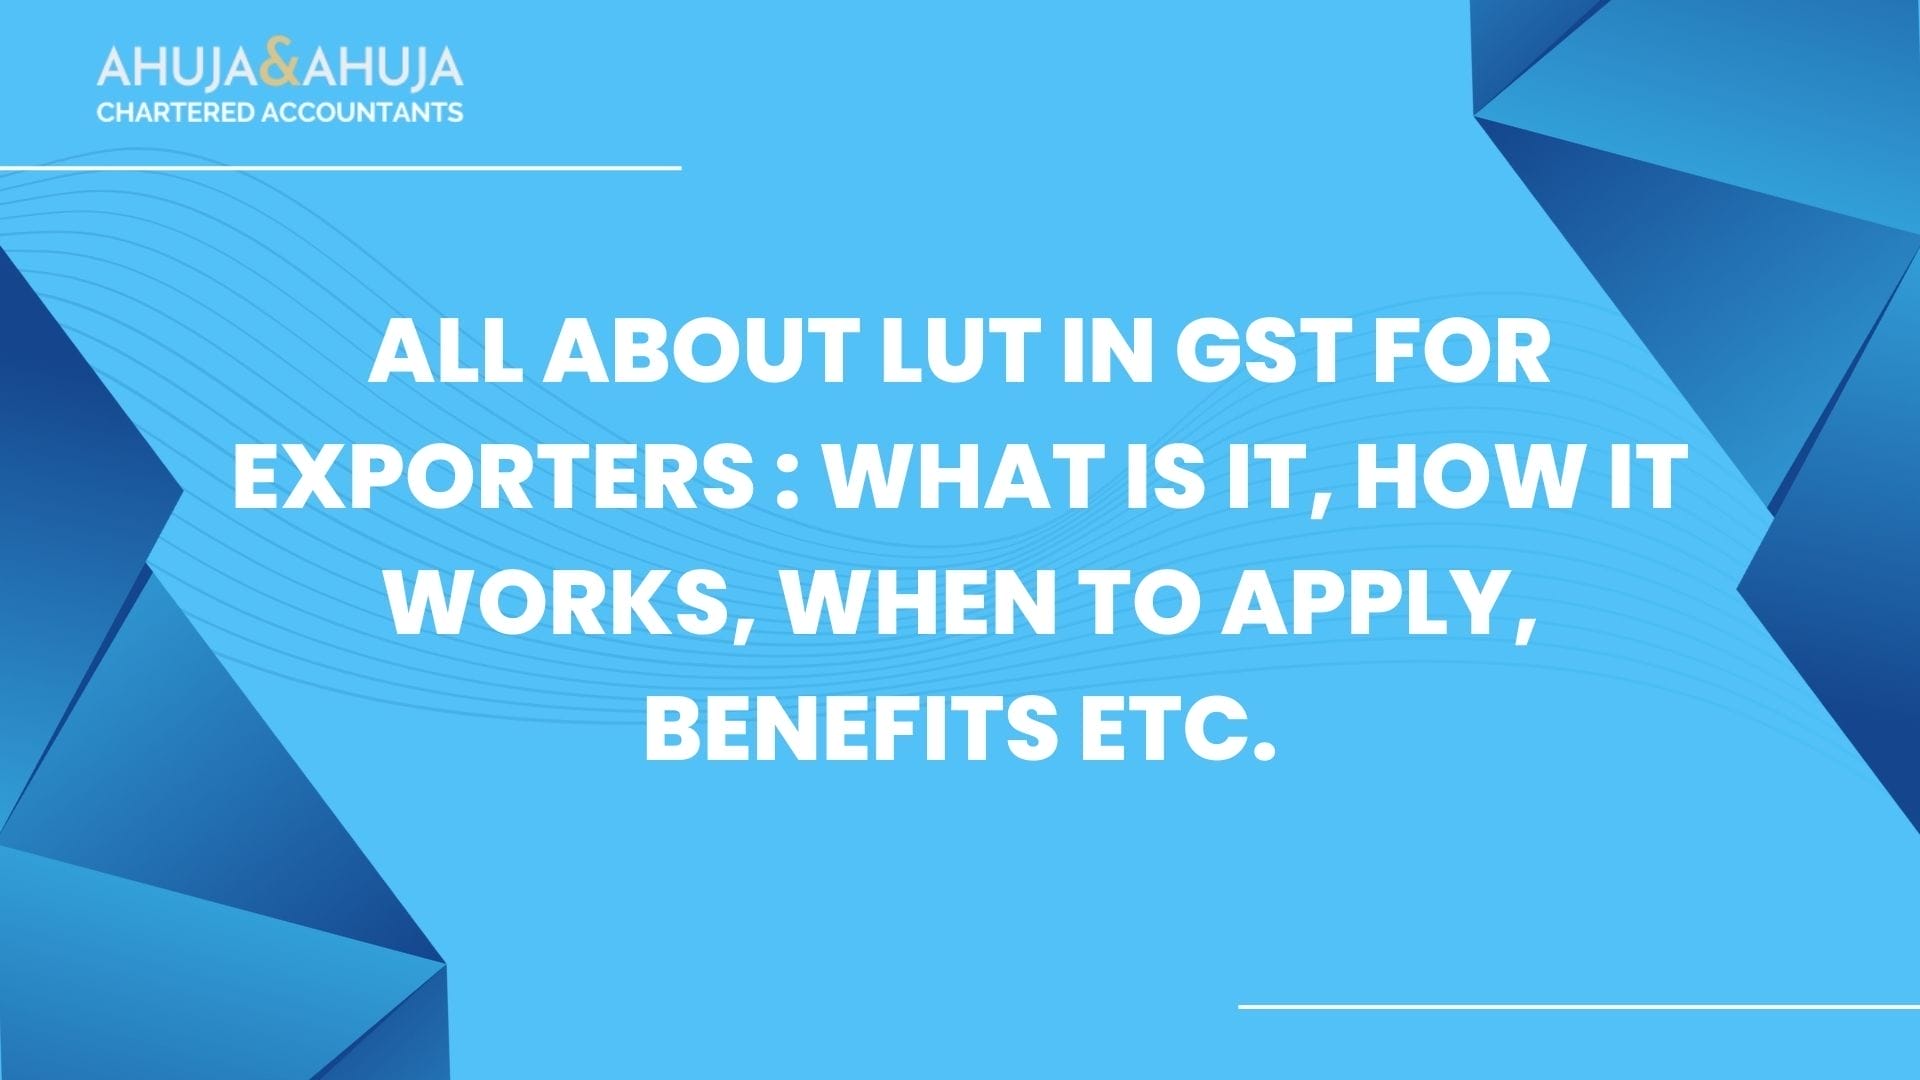 LUT in GST for Exporters